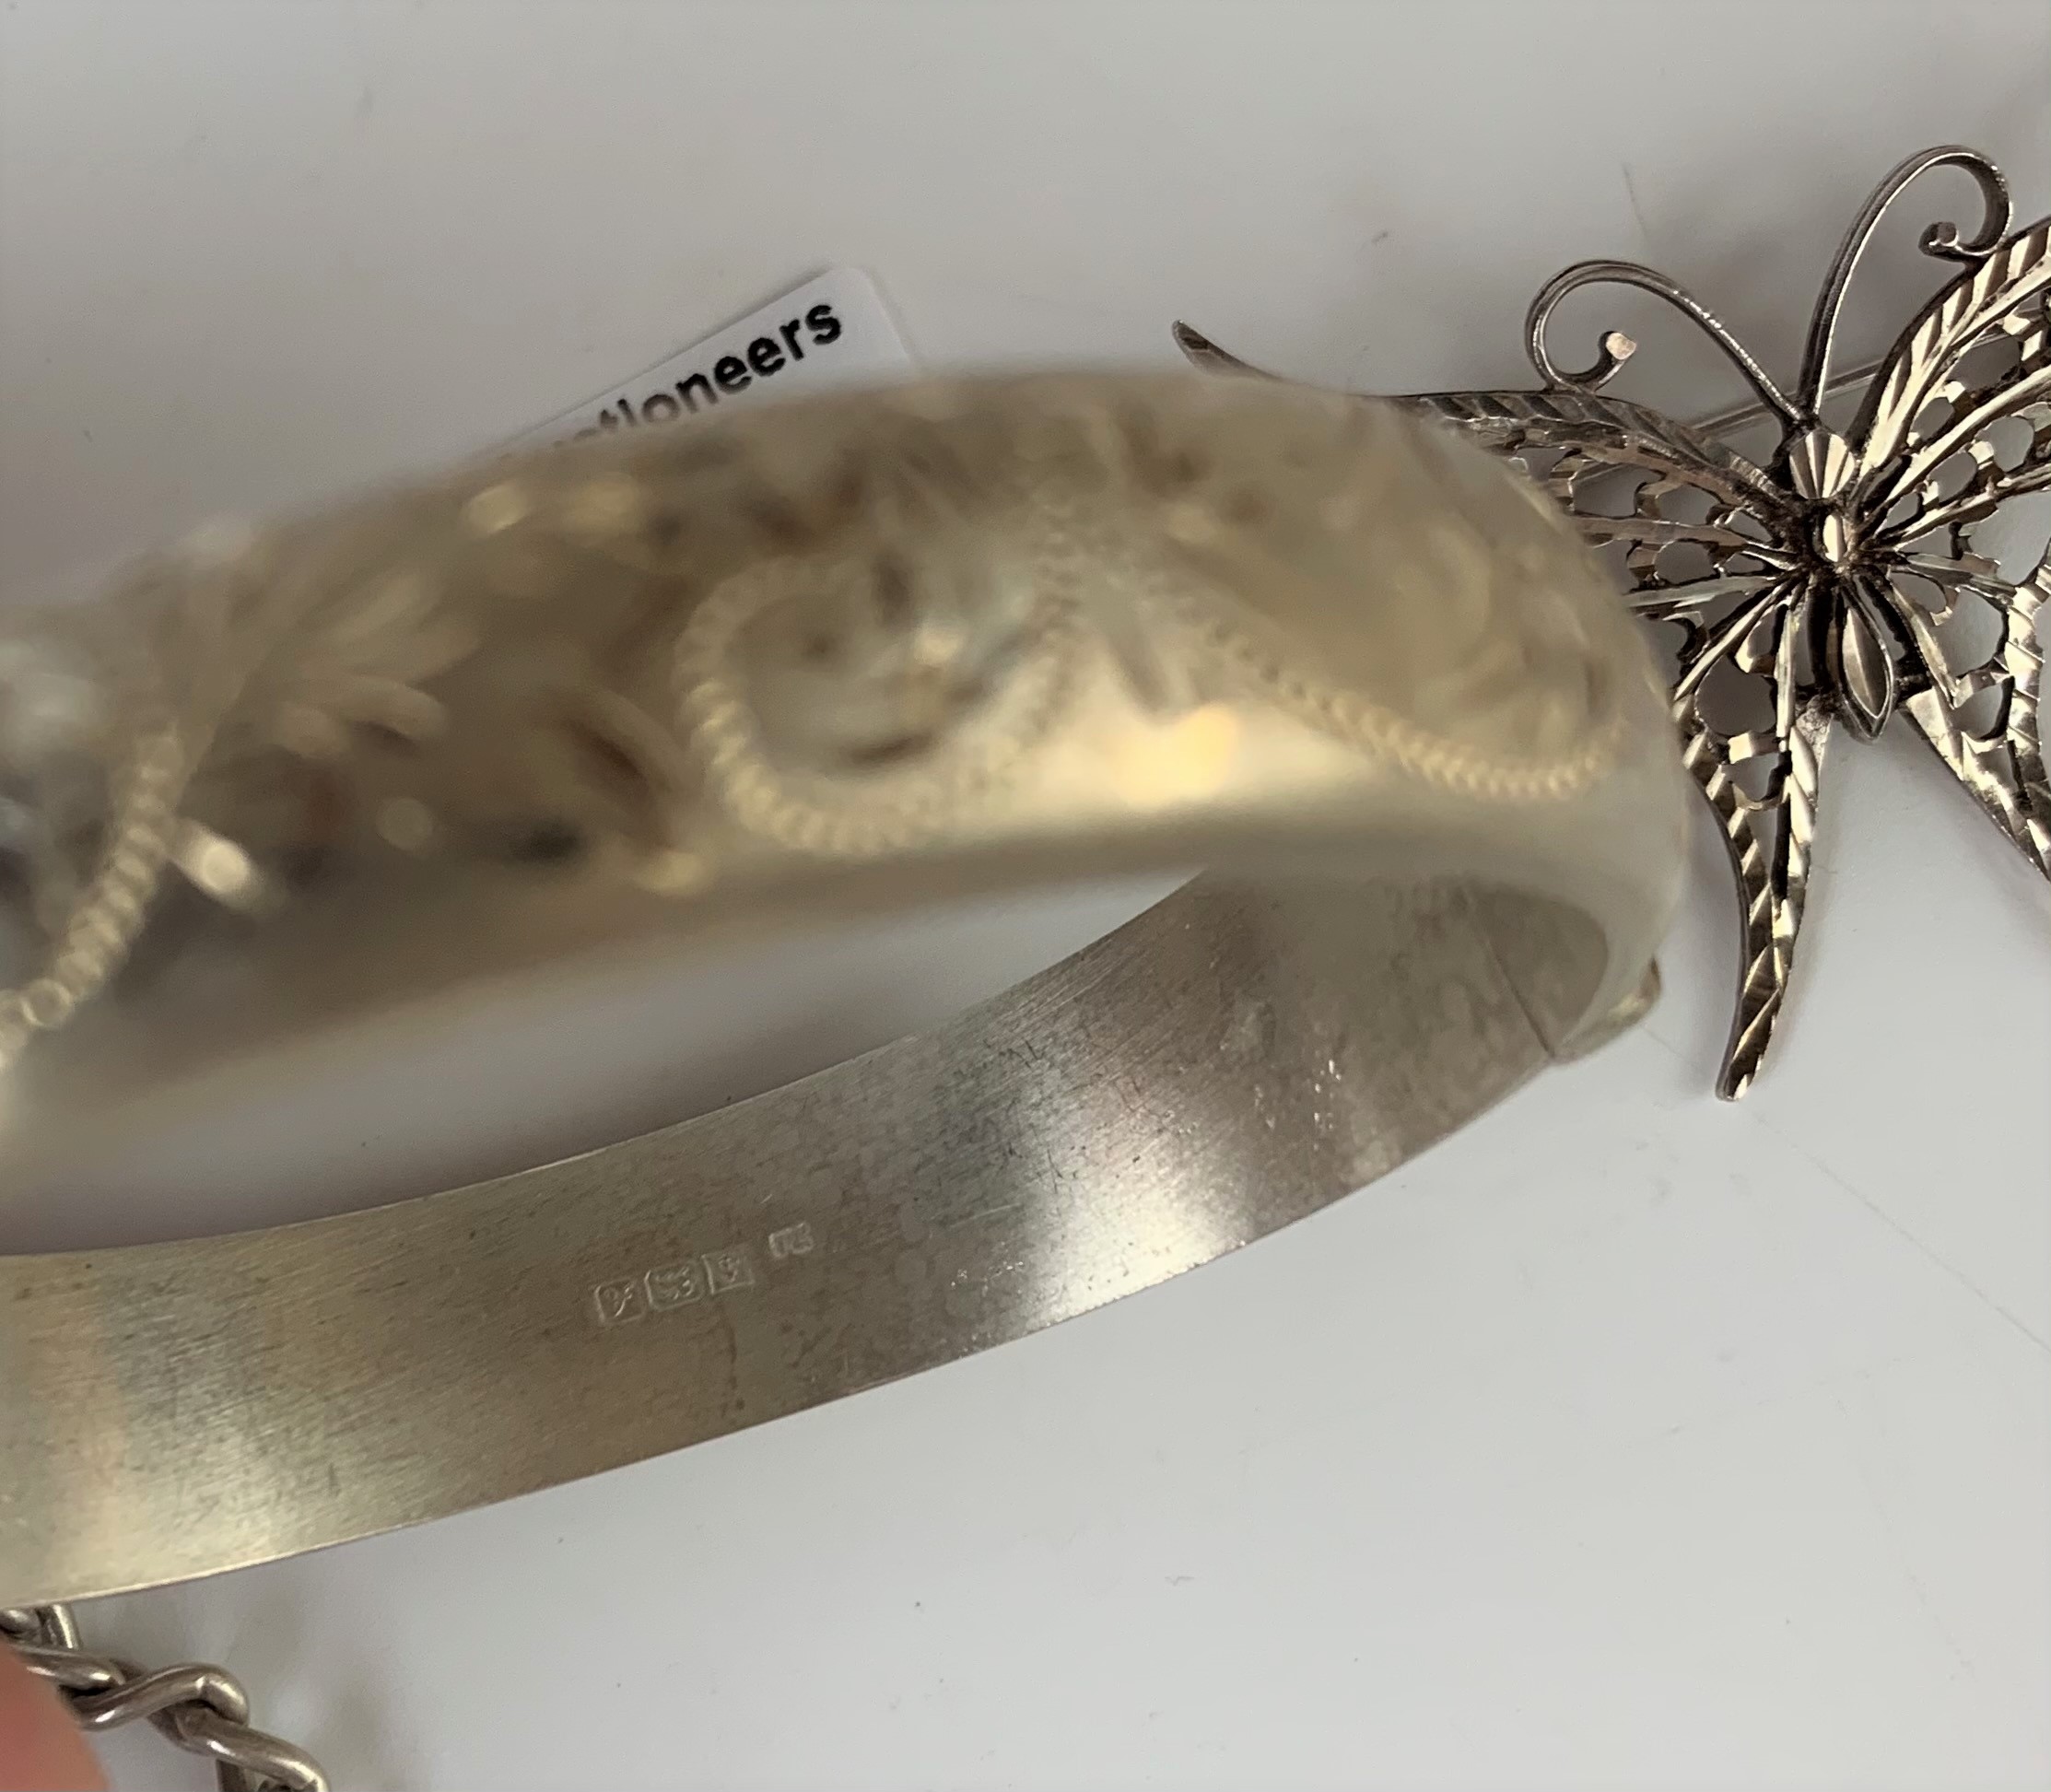 2 silver bangles, silver bracelet and silver butterfly brooch, total w: 1.9 ozt - Image 4 of 5